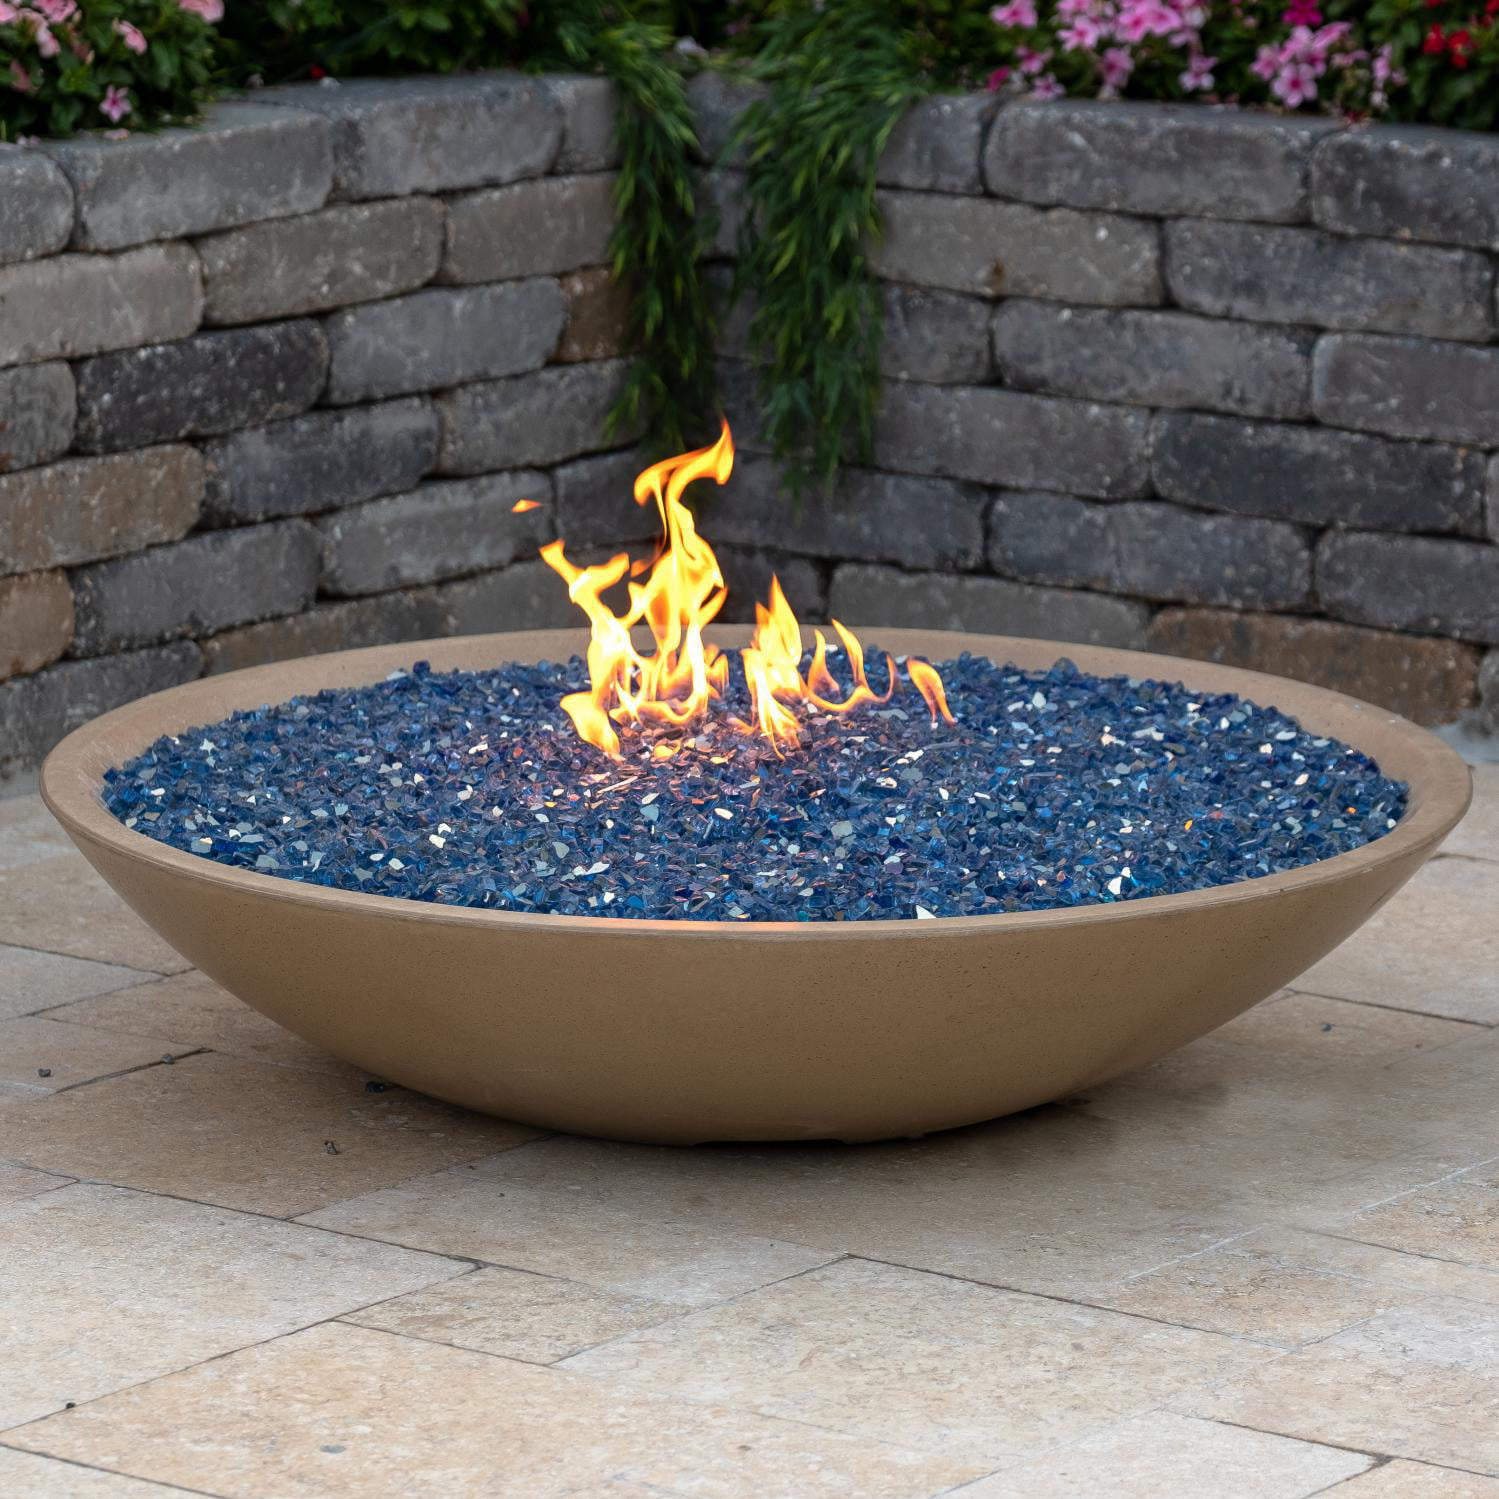 Lakeview Outdoor Designs 48-Inch Propane T-Style Burner Stainless Steel Ships As Natural Gas 